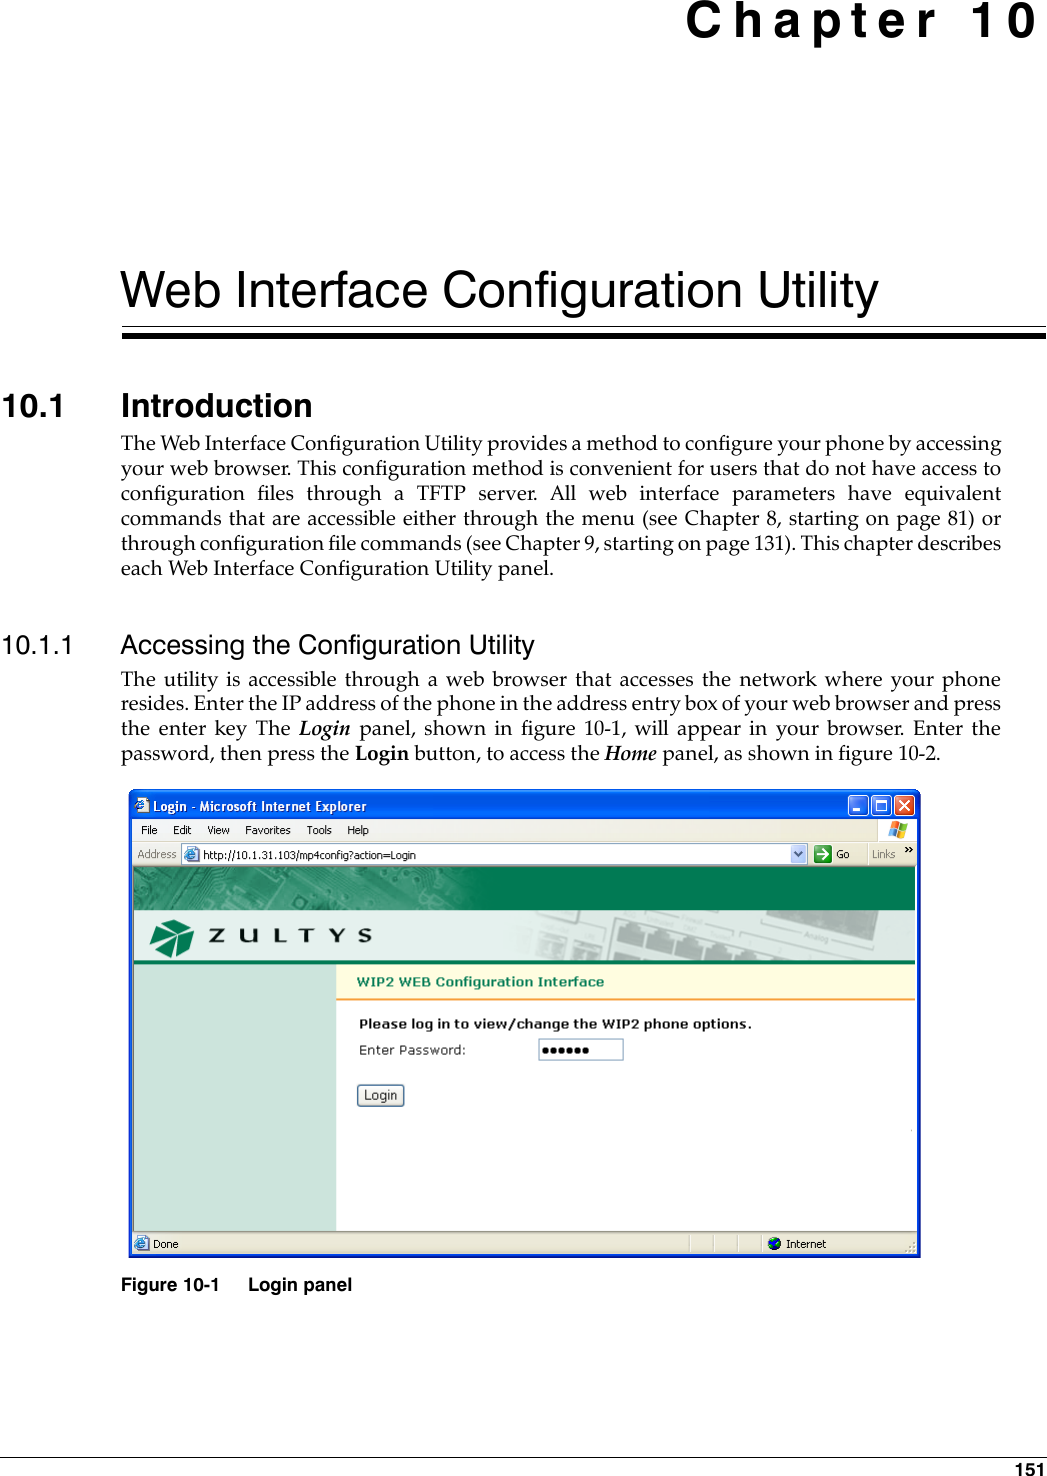 151 Chapter 10Web Interface Configuration Utility10.1 IntroductionThe Web Interface Configuration Utility provides a method to configure your phone by accessingyour web browser. This configuration method is convenient for users that do not have access toconfiguration files through a TFTP server. All web interface parameters have equivalentcommands that are accessible either through the menu (see Chapter 8, starting on page 81) orthrough configuration file commands (see Chapter 9, starting on page 131). This chapter describeseach Web Interface Configuration Utility panel.10.1.1 Accessing the Configuration UtilityThe utility is accessible through a web browser that accesses the network where your phoneresides. Enter the IP address of the phone in the address entry box of your web browser and pressthe enter key The Login panel, shown in figure 10-1, will appear in your browser. Enter thepassword, then press the Login button, to access the Home panel, as shown in figure 10-2.Figure 10-1 Login panel